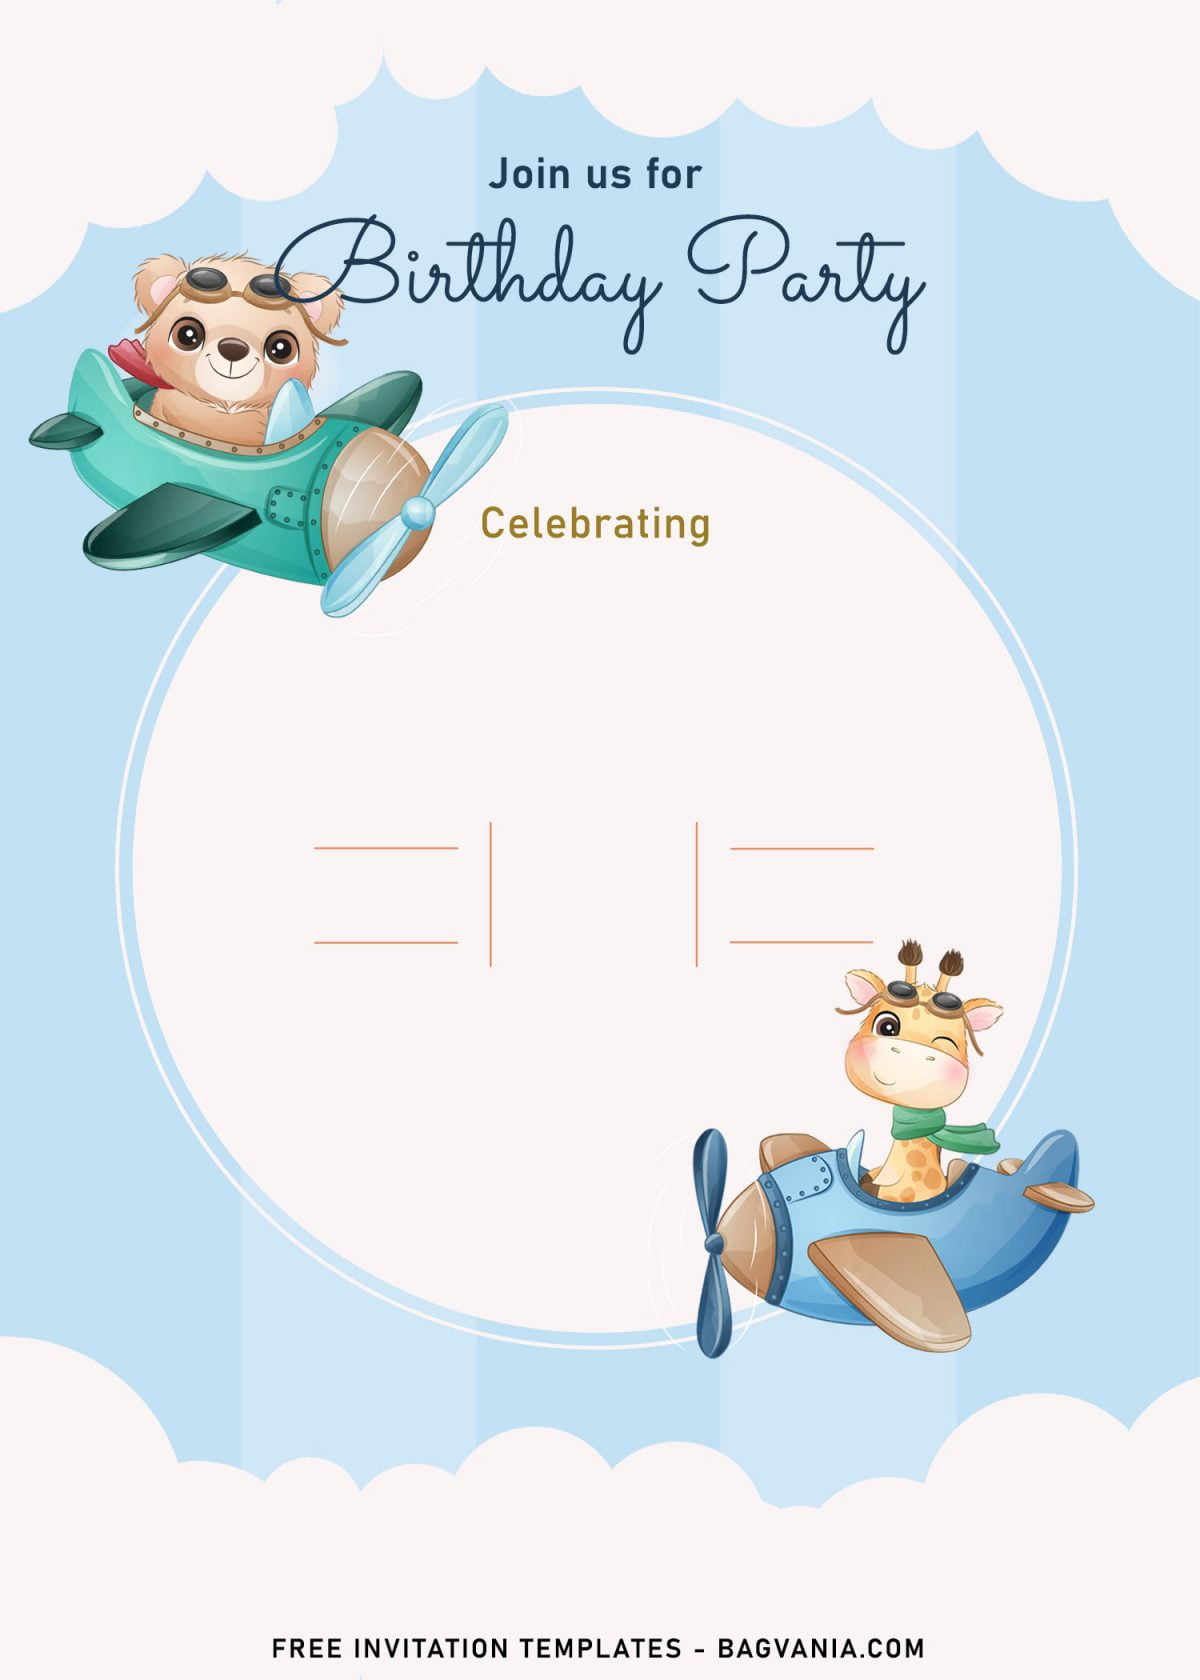 9+ Cute Hand Drawn Up In The Sky Birthday Invitation Templates and has cute baby animals flying plane